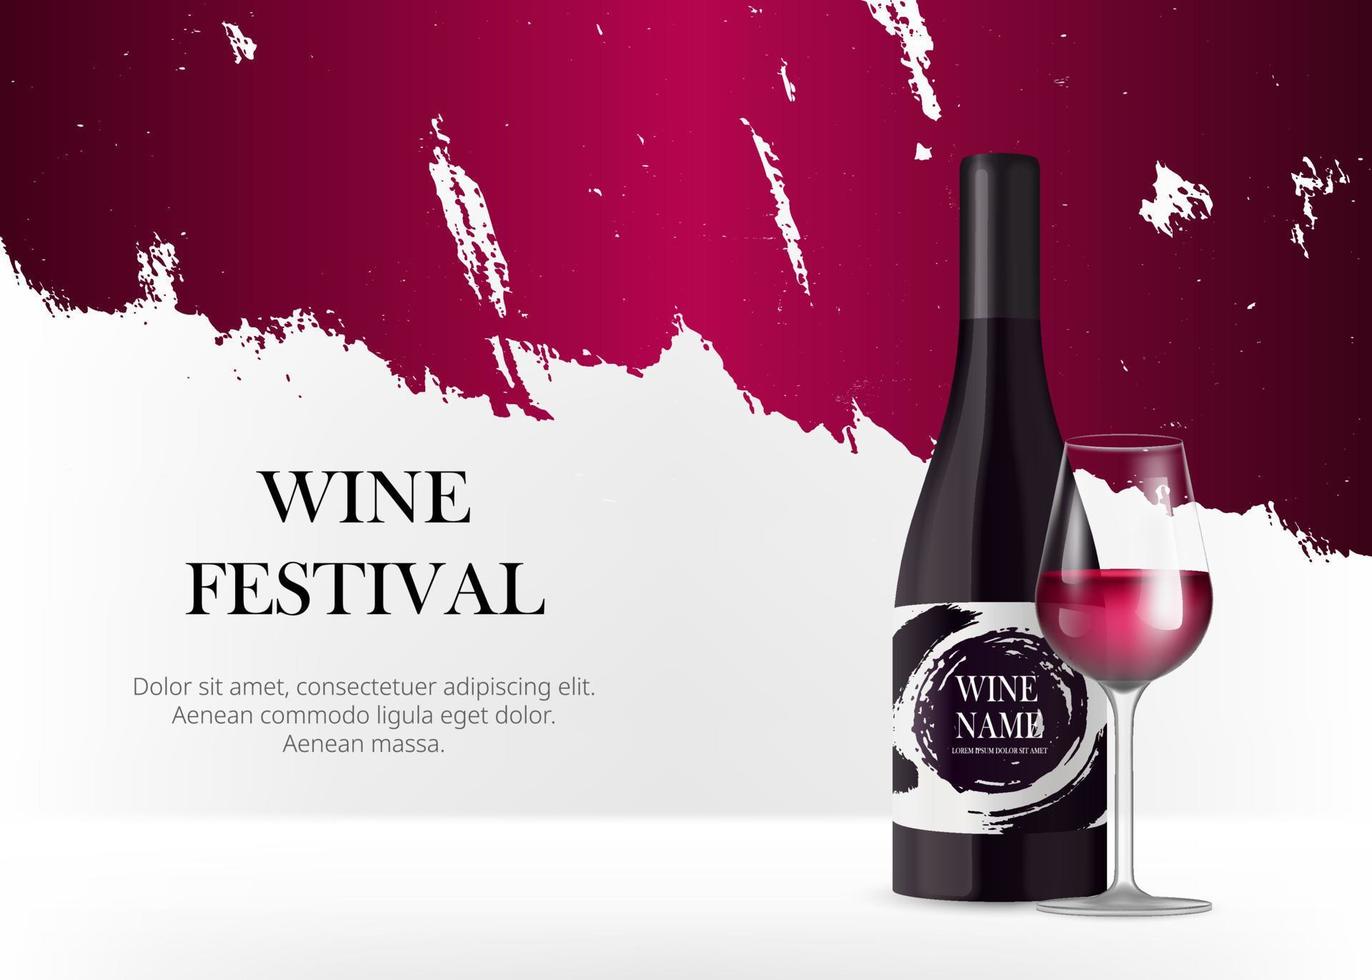 Wine bottle with label on white background. Black bottle. Realistic 3d wine glass with red liquid. Product mock up banner for branding. Grunge luxury background stage. Vector illustration.